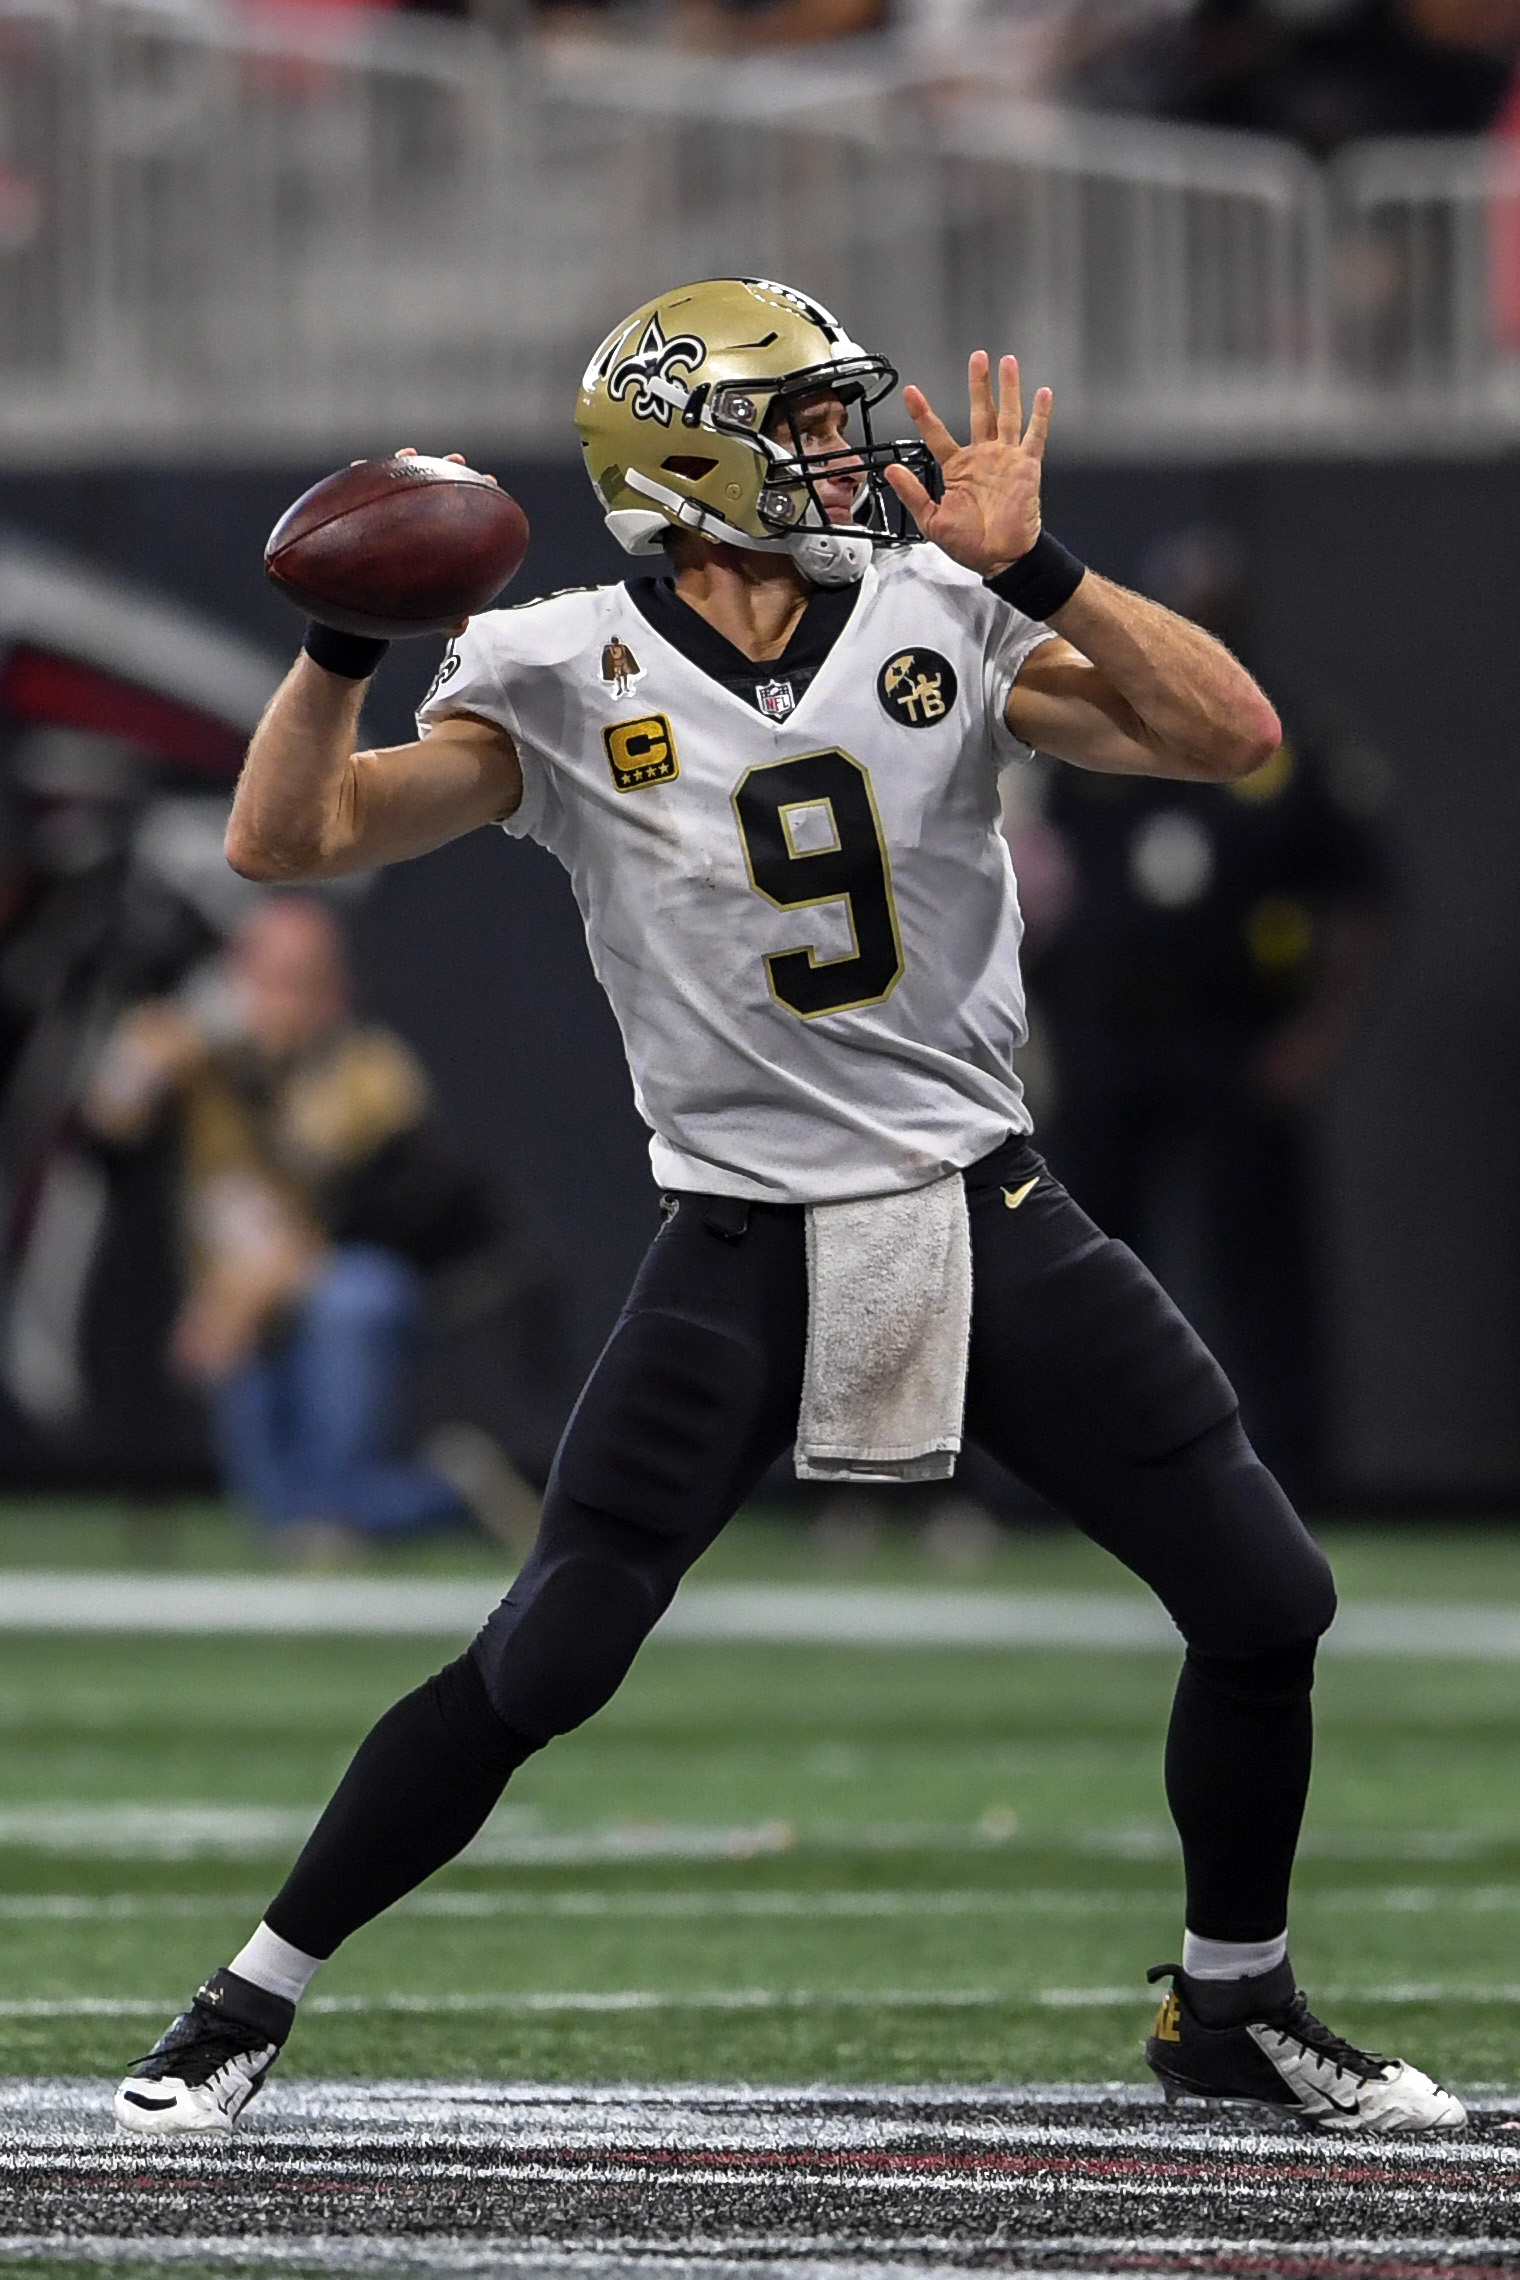 If Drew Brees retires, who will the New Orleans Saints turn to?